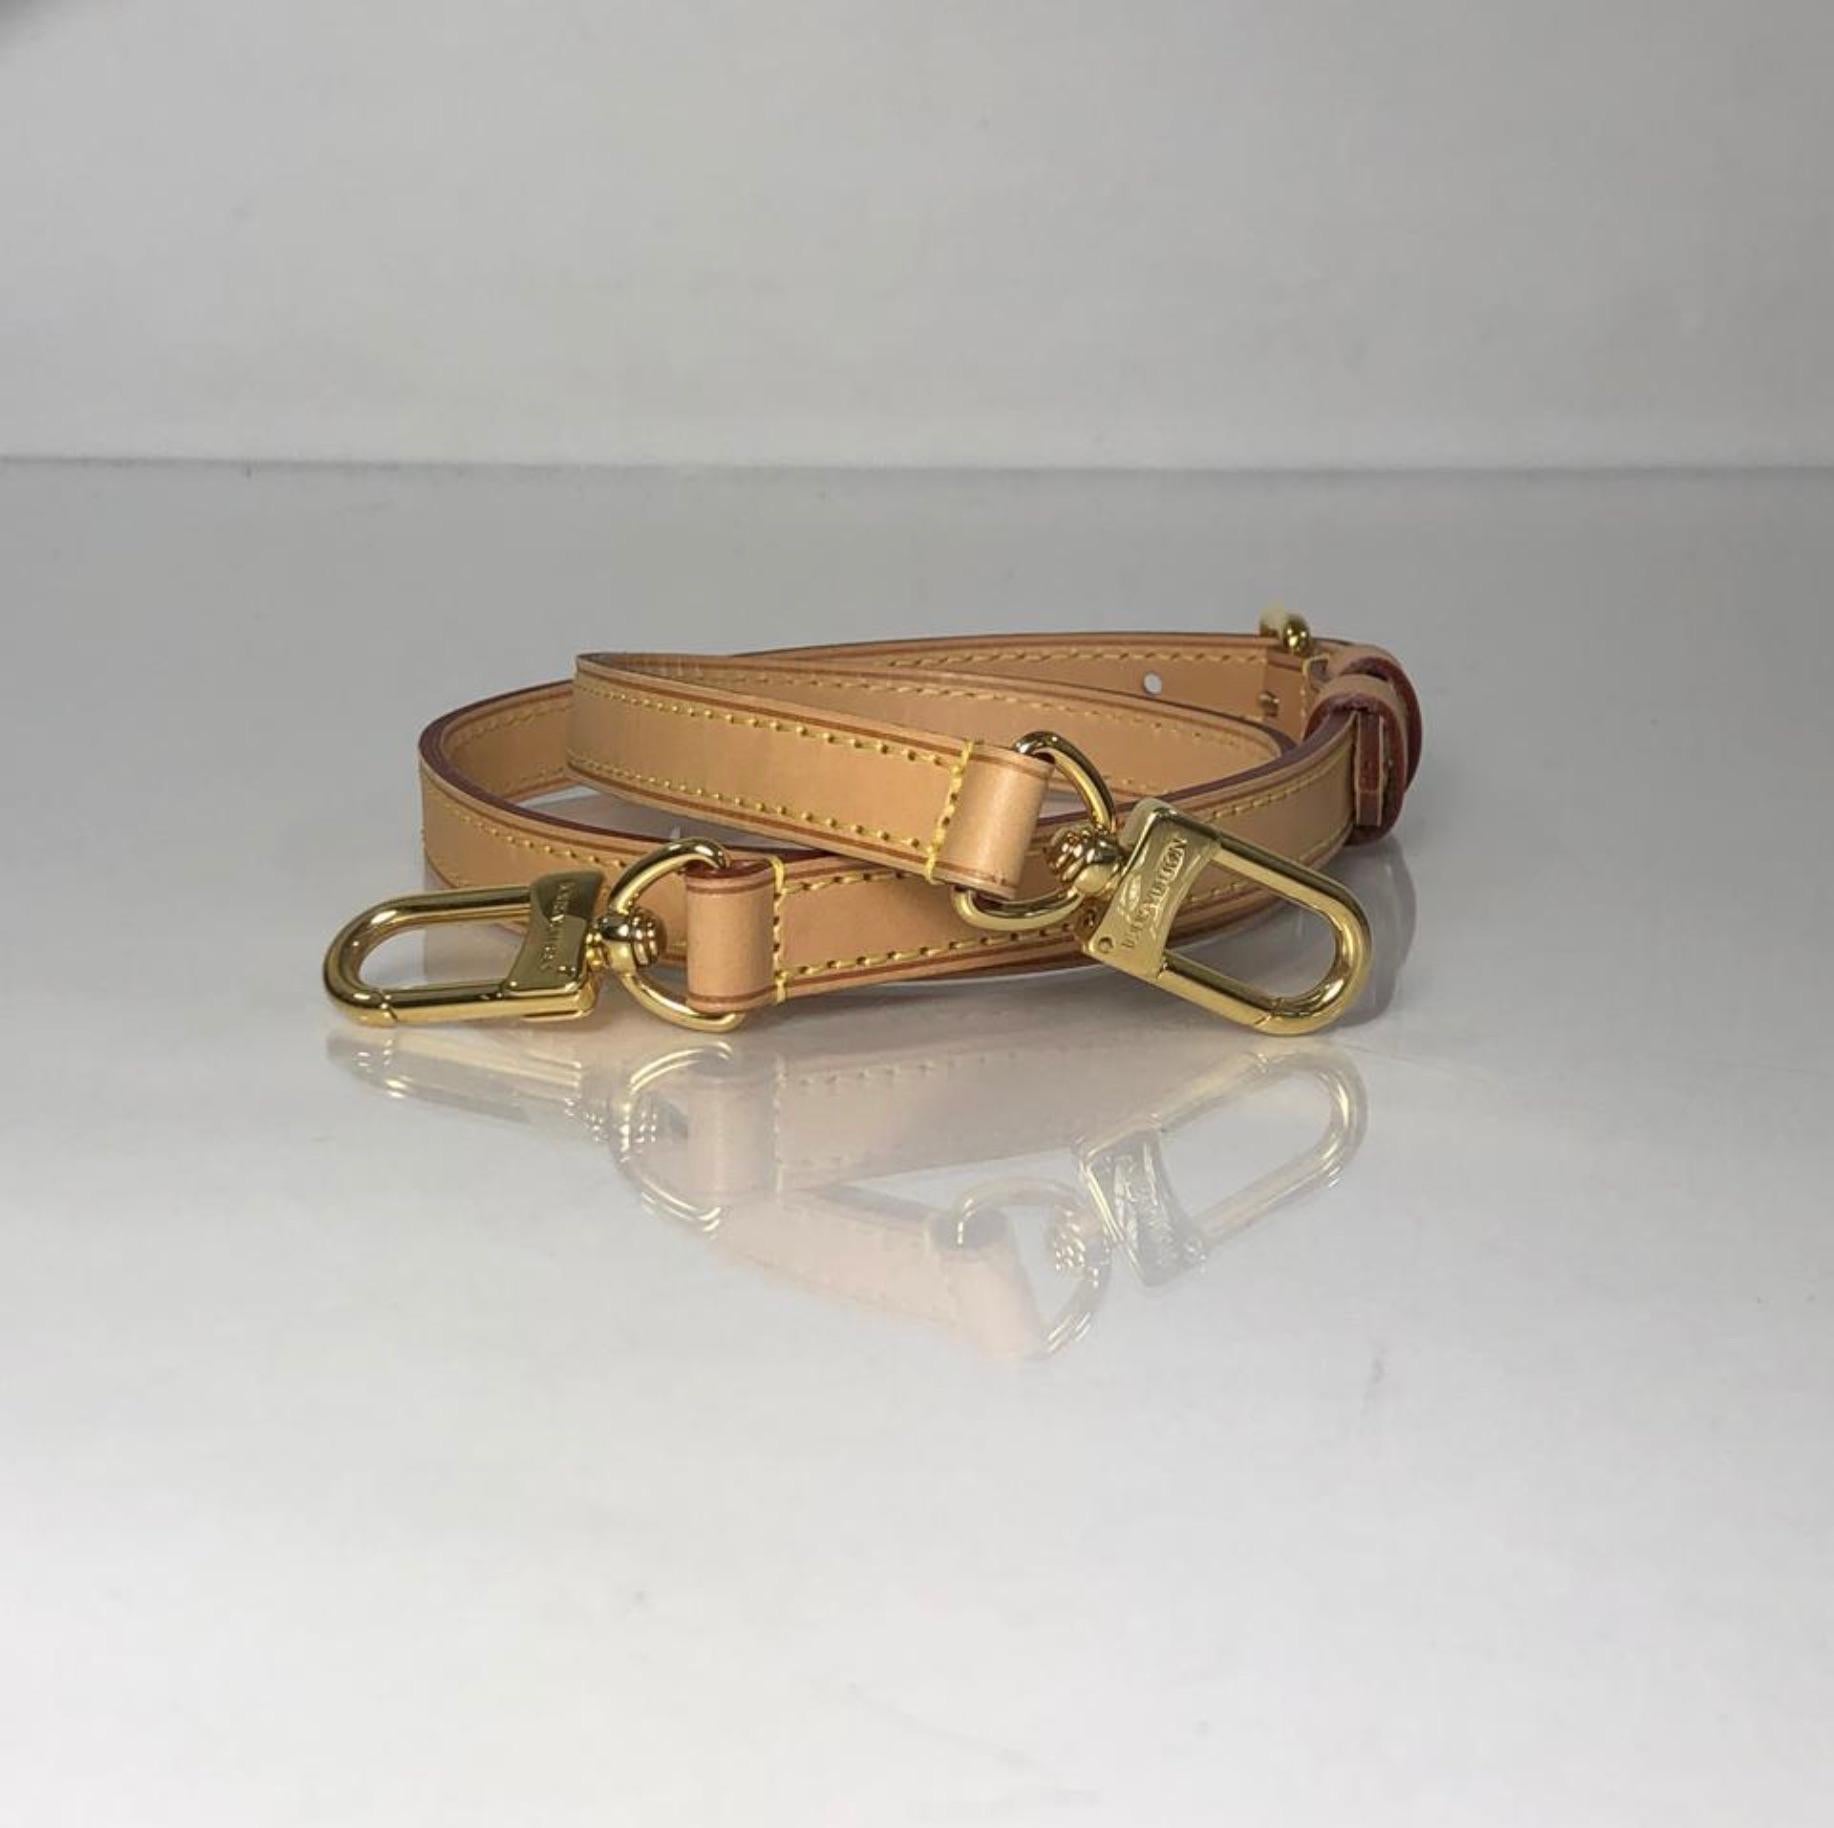 Louis Vuitton Vachette Strap - Shoulder (Narrow and Adjustable) In Excellent Condition For Sale In Saint Charles, IL